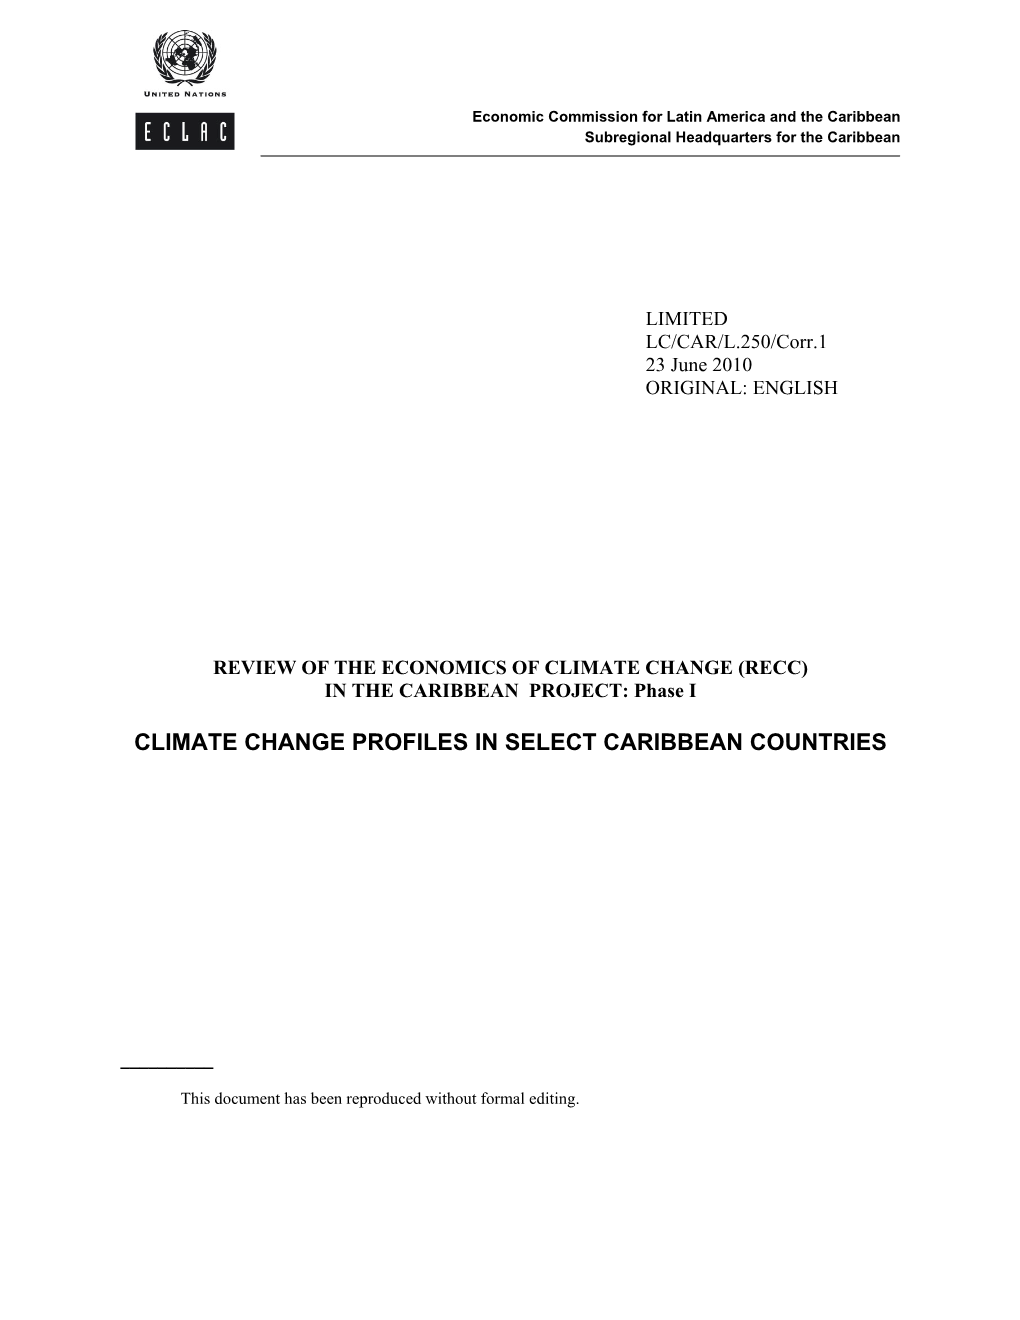 Climate Change Profiles in Select Caribbean Countries